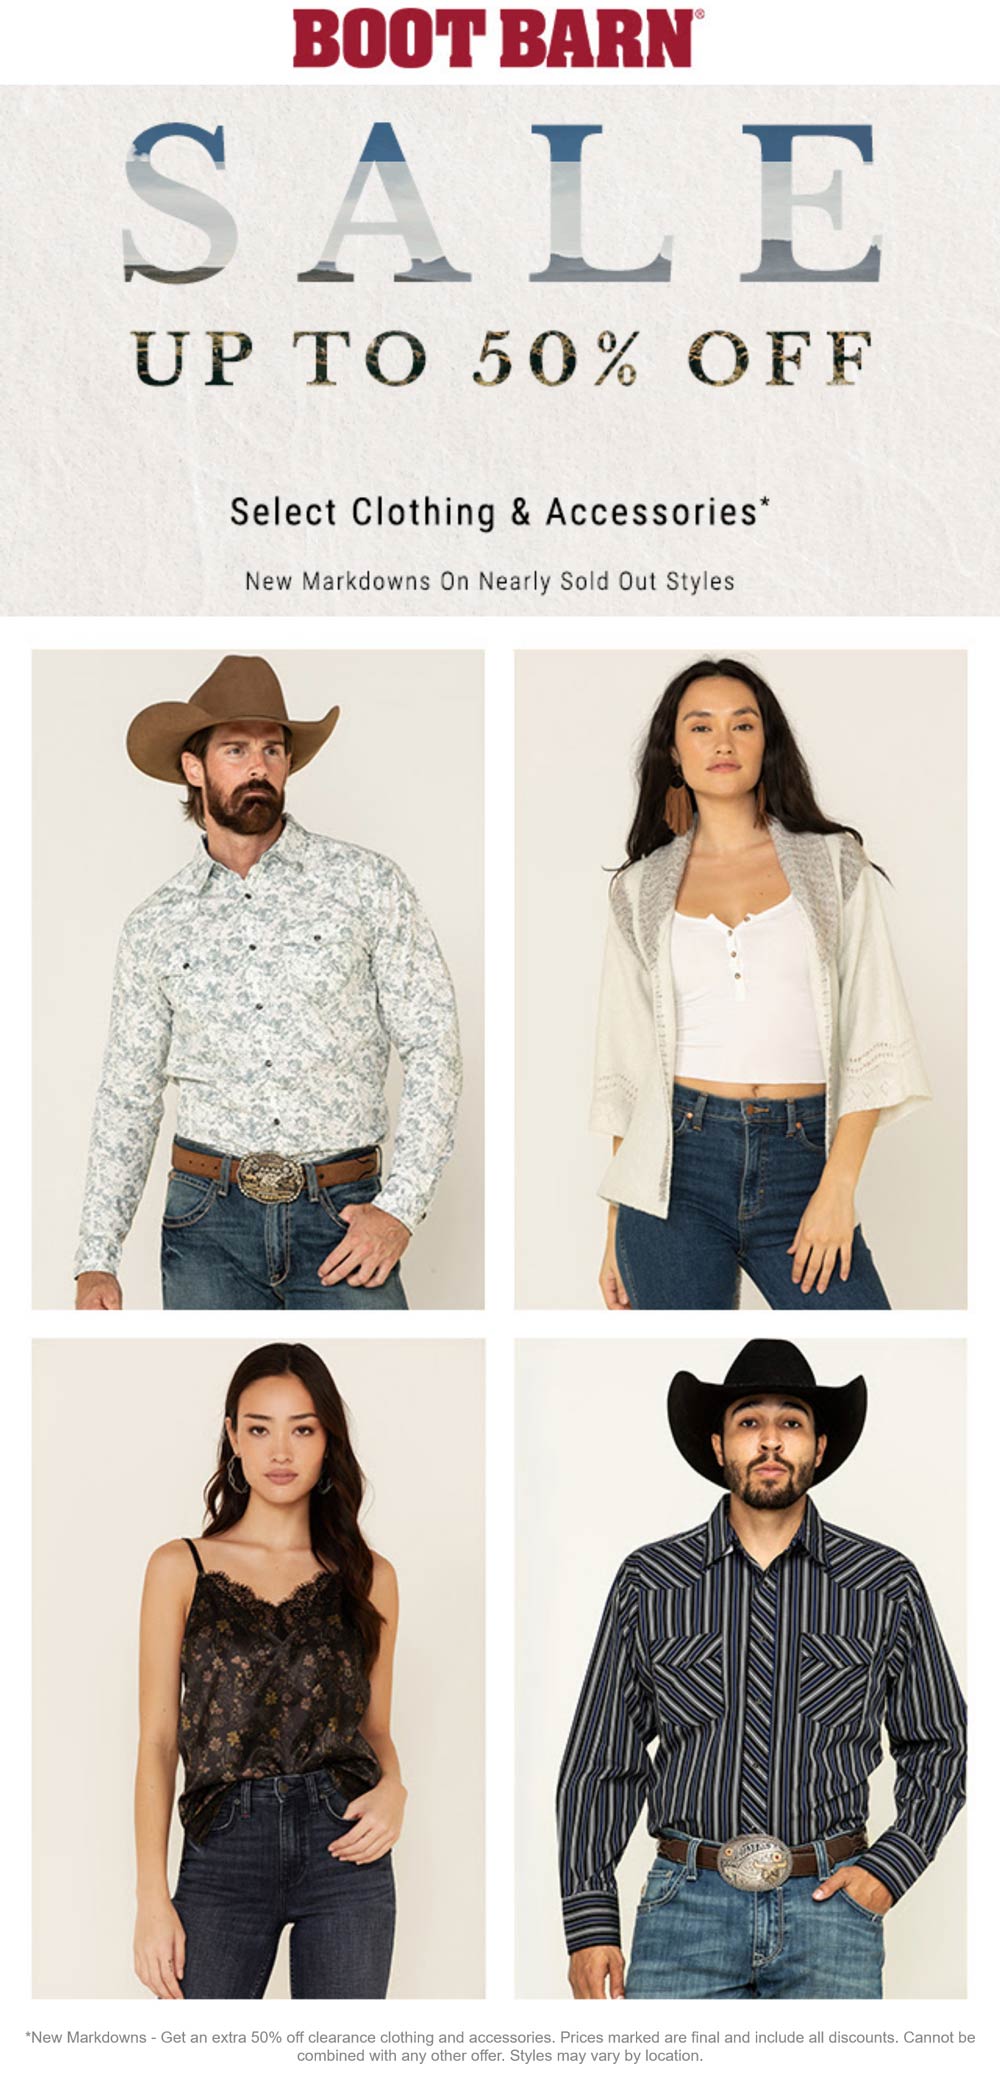 Extra 50 off clearance clothing and accessories at Boot Barn, ditto